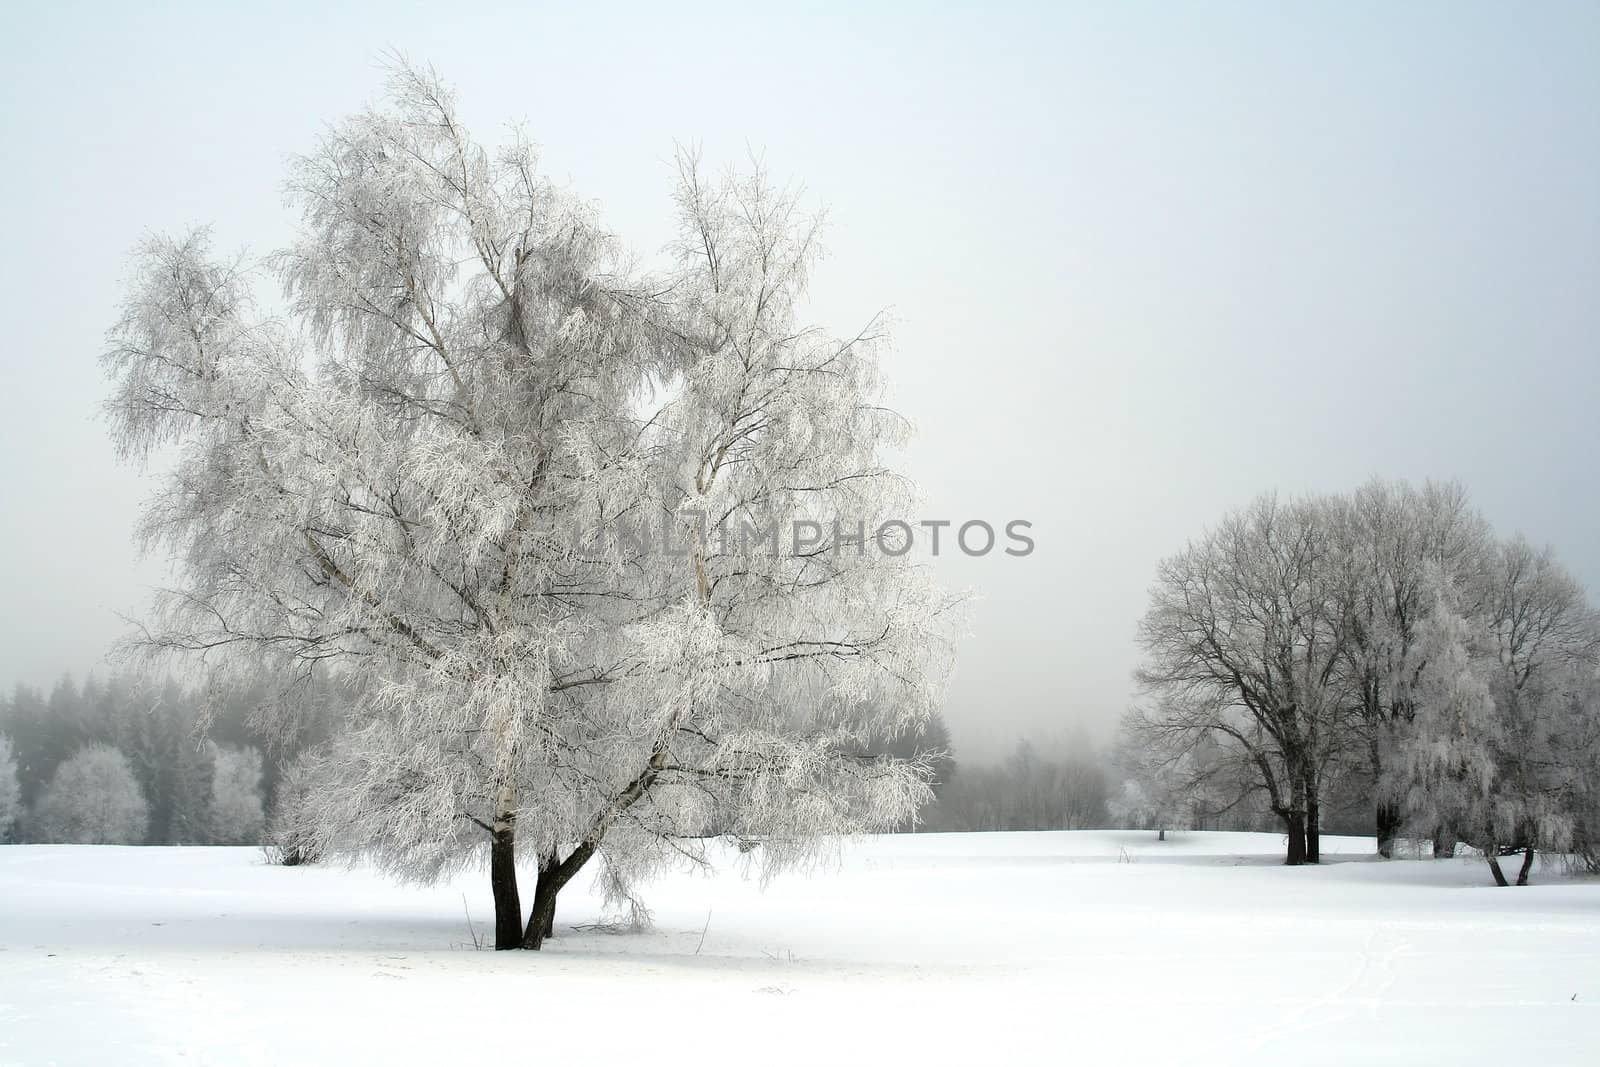 snow landscape with trees